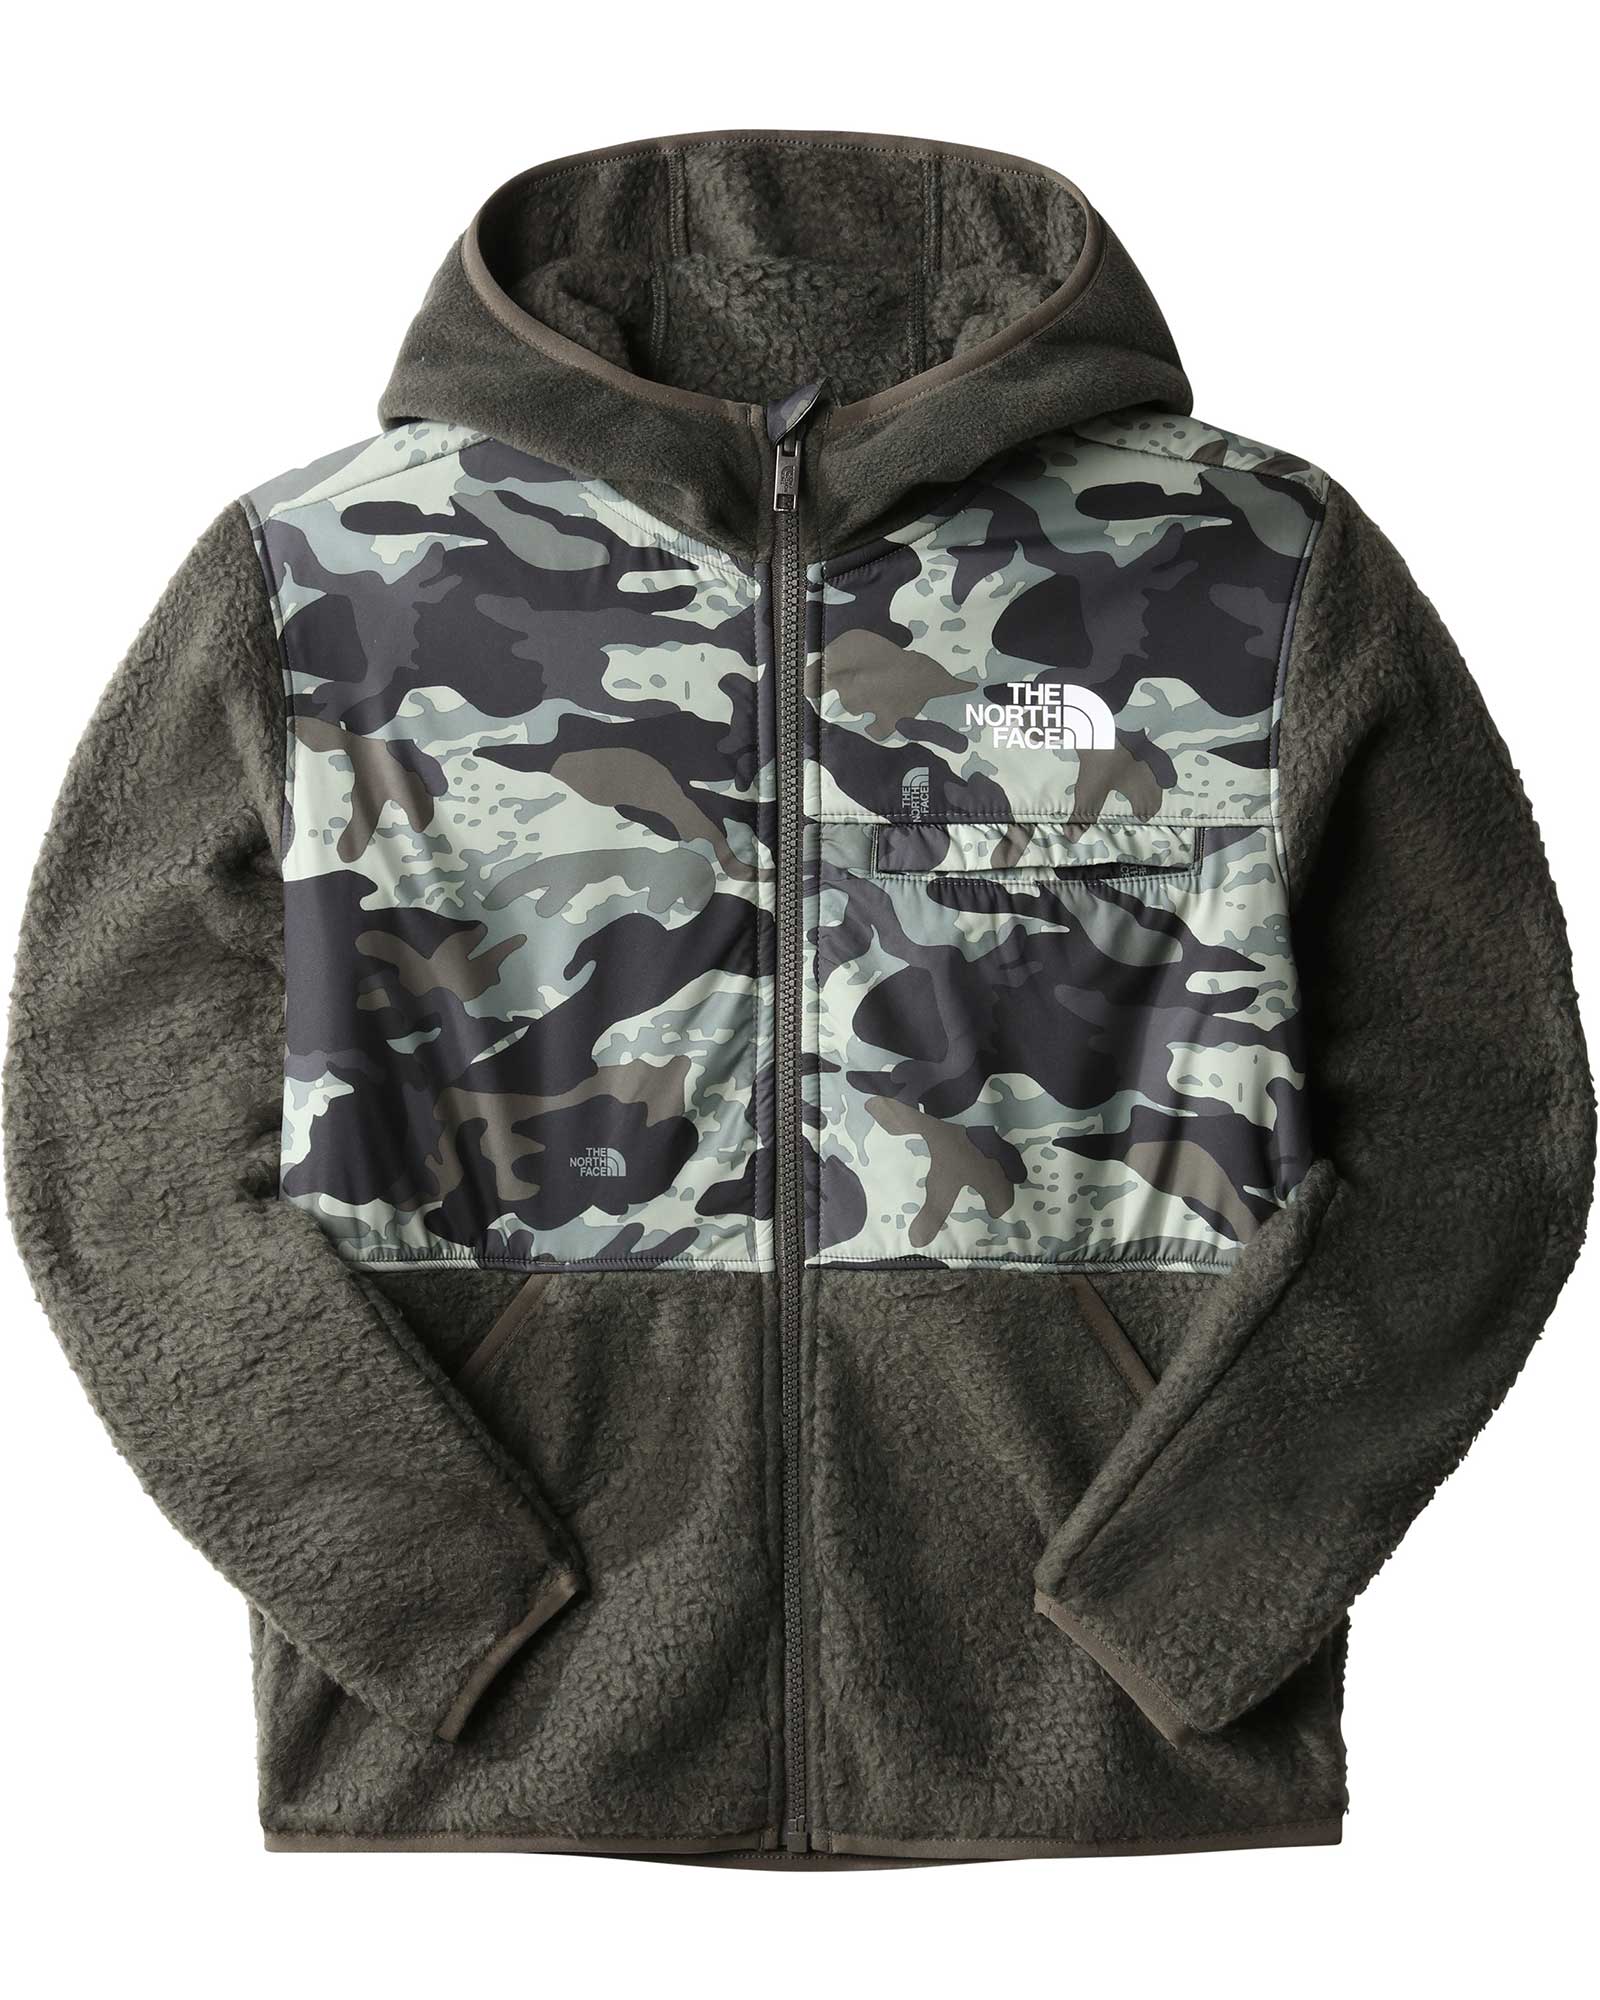 The North Face Forrest Kids’ Fleece Full Zip Hooded Jacket - New Taupe Green Camo S